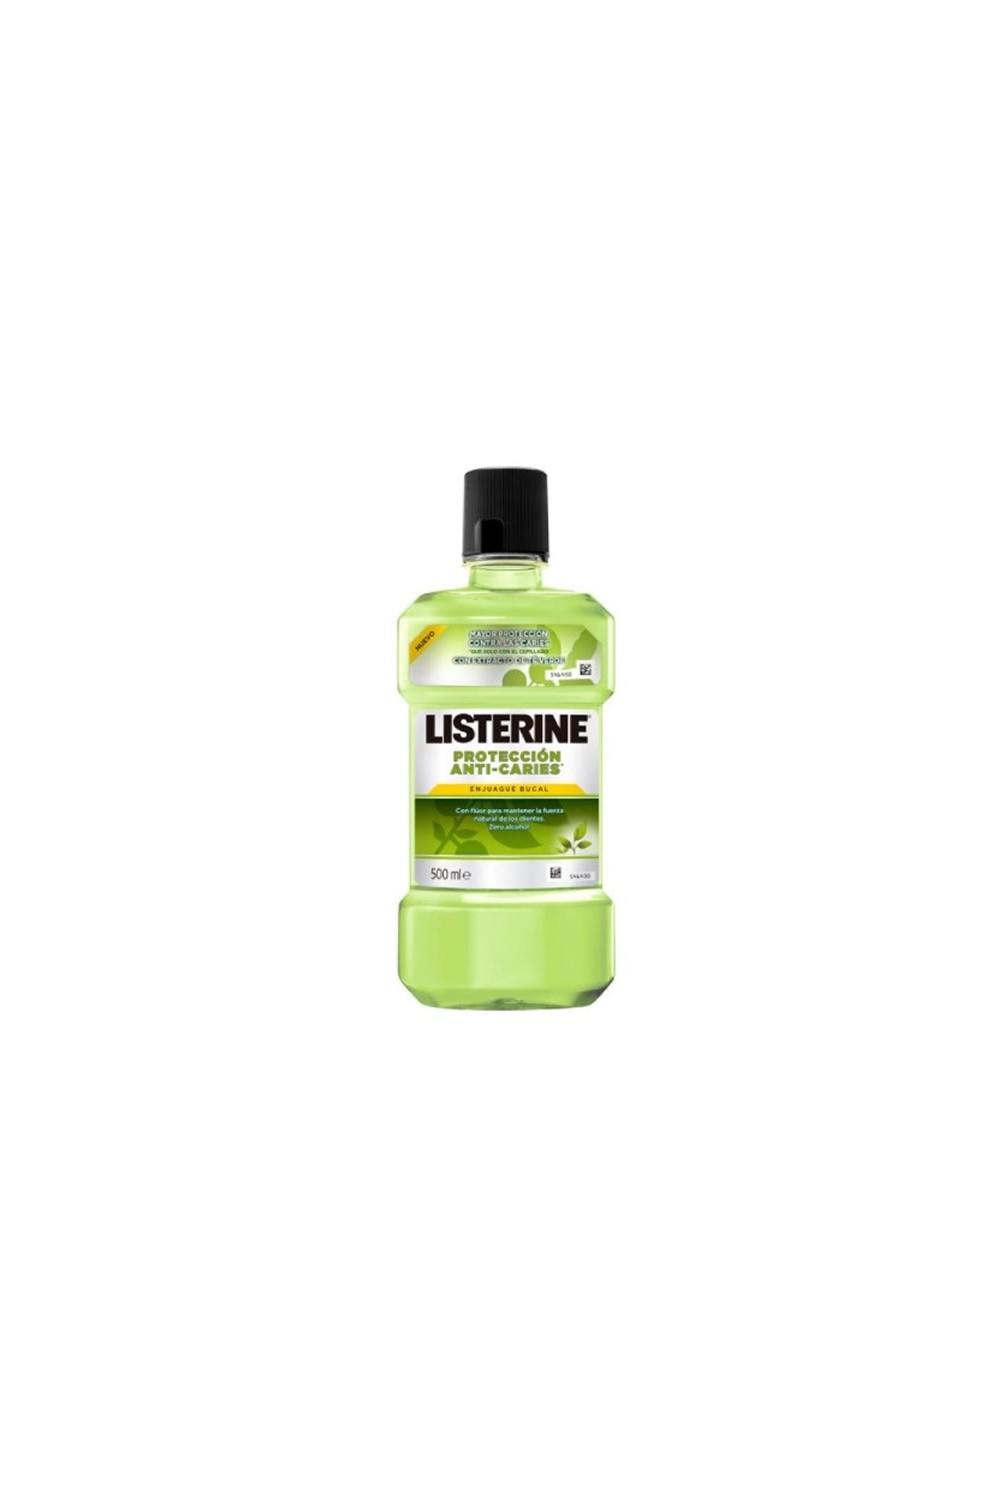 Listerine Protection Against Cavities Mouthwash 500ml